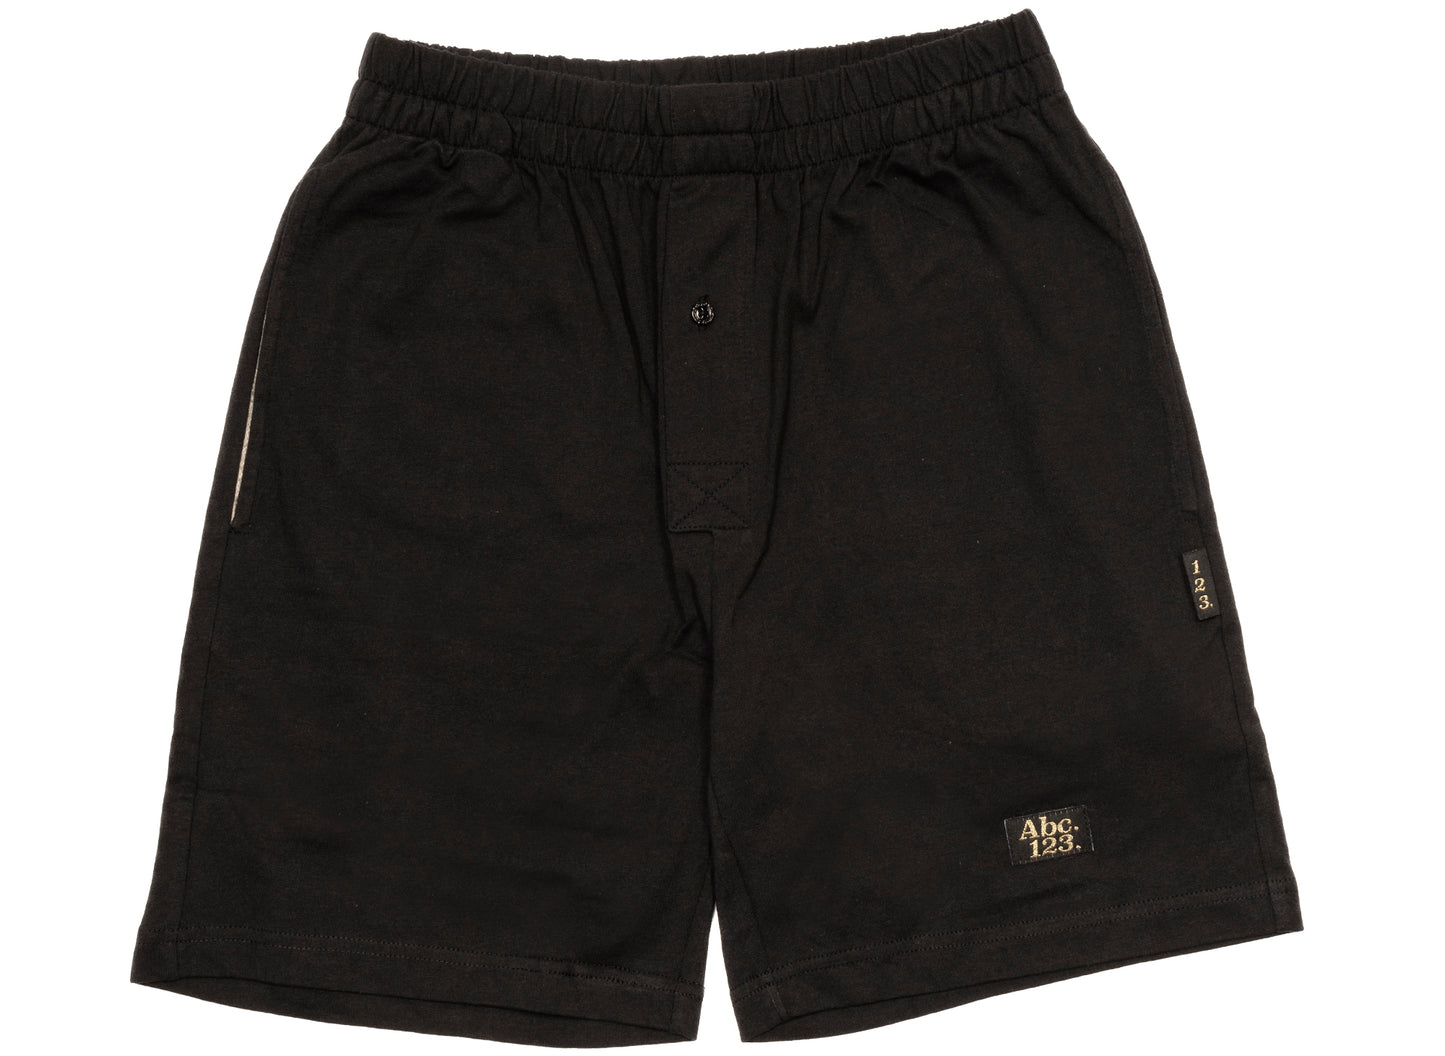 Advisory Board Crystals Abc. 123. Lounge Shorts in Anthracite